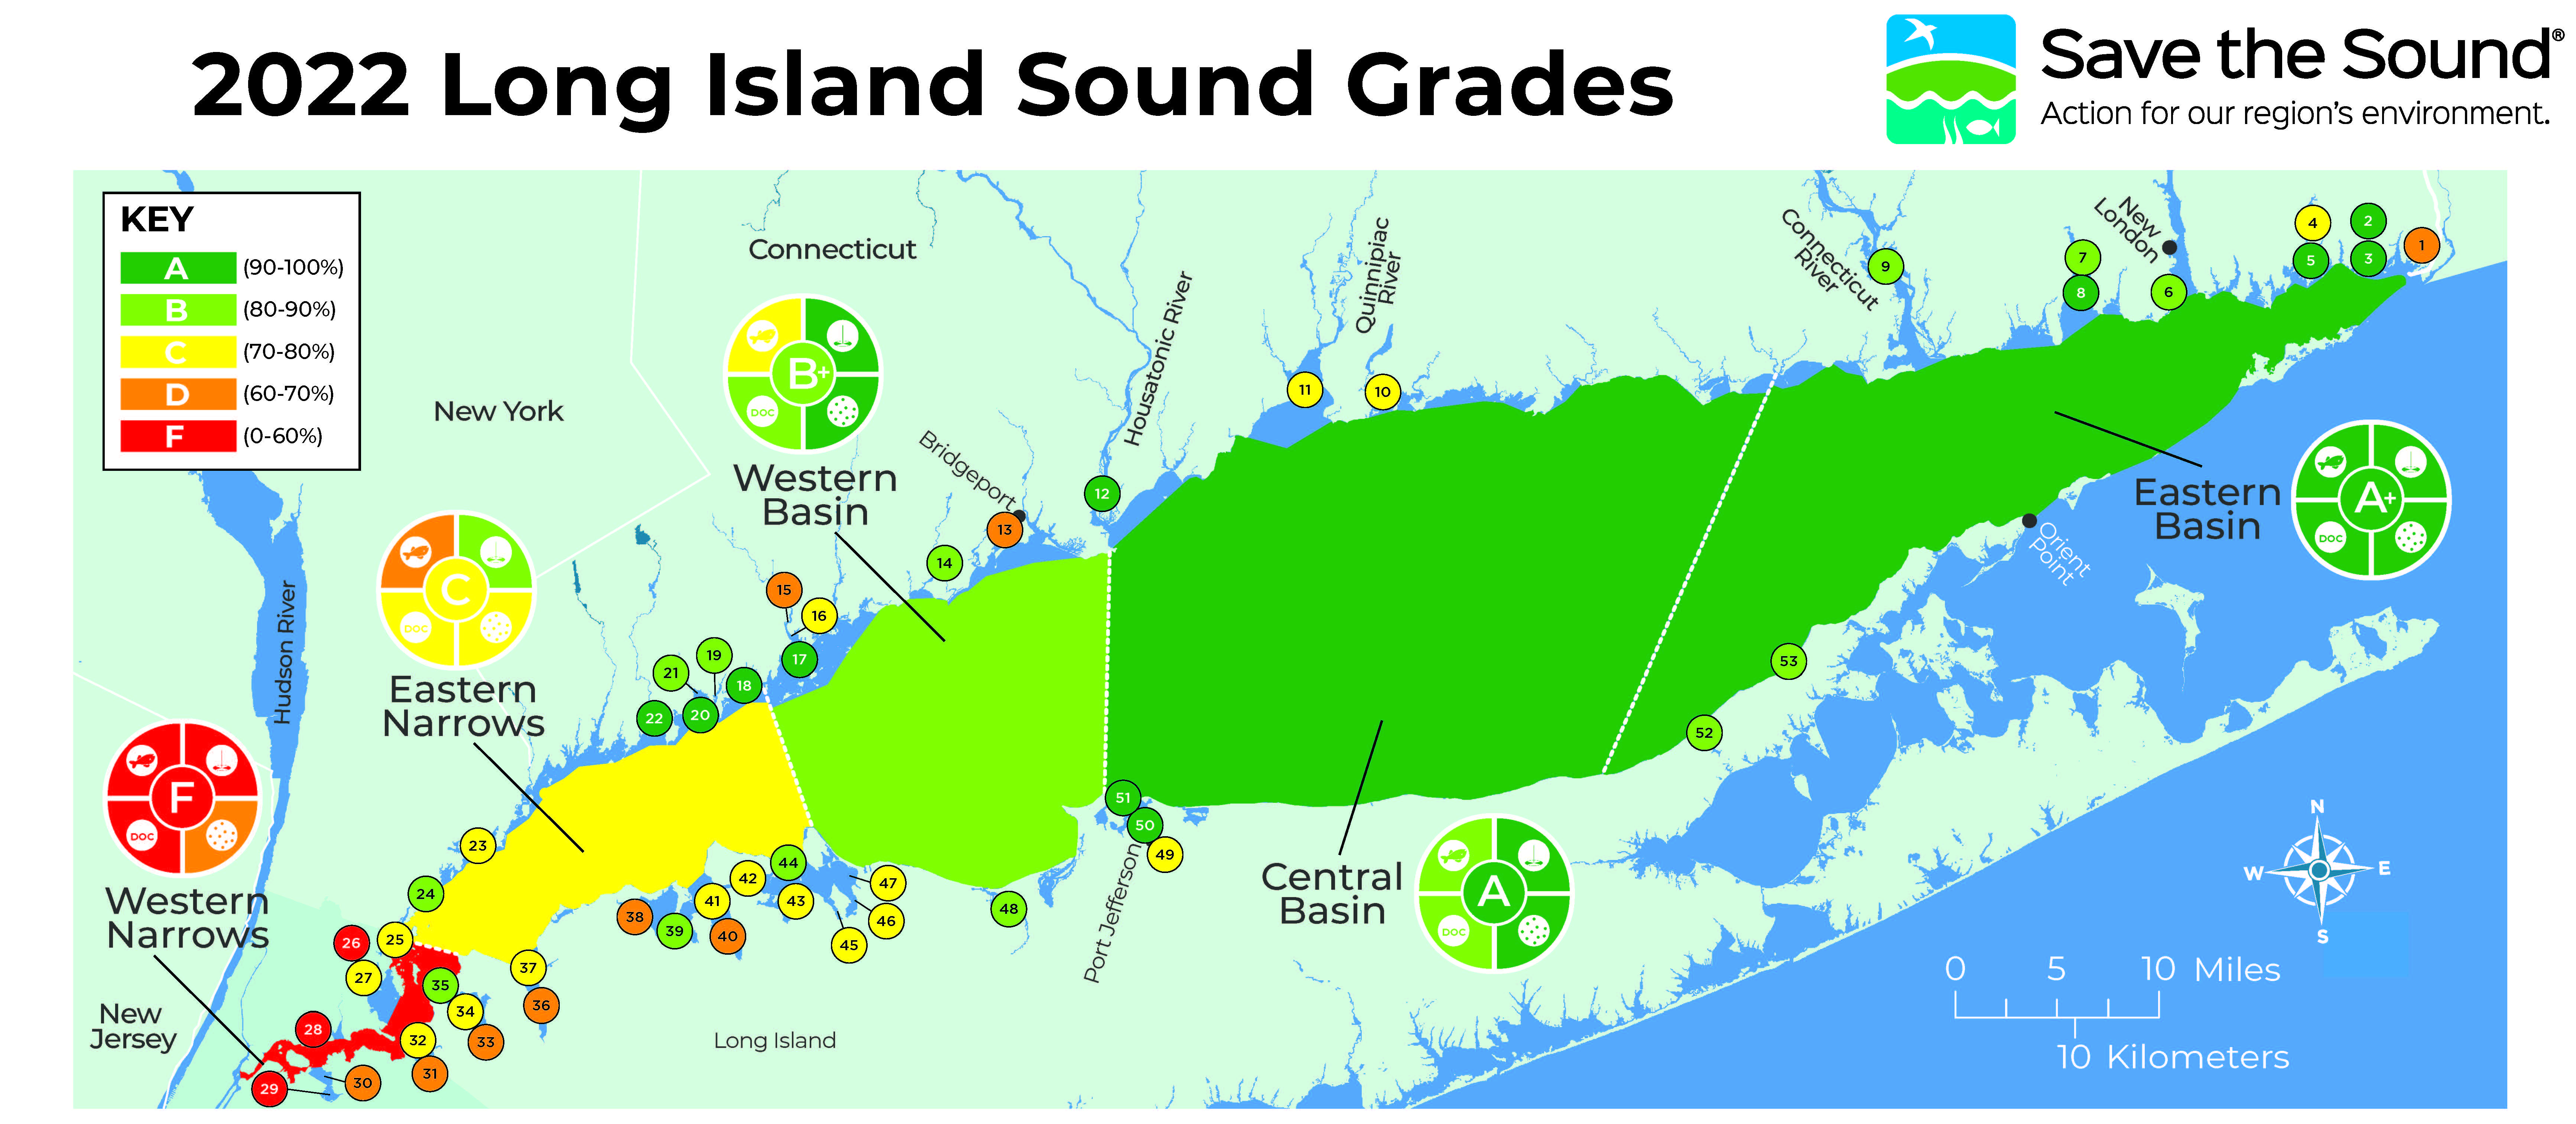 Save the Sound 2022 Long Island Sound Report Card